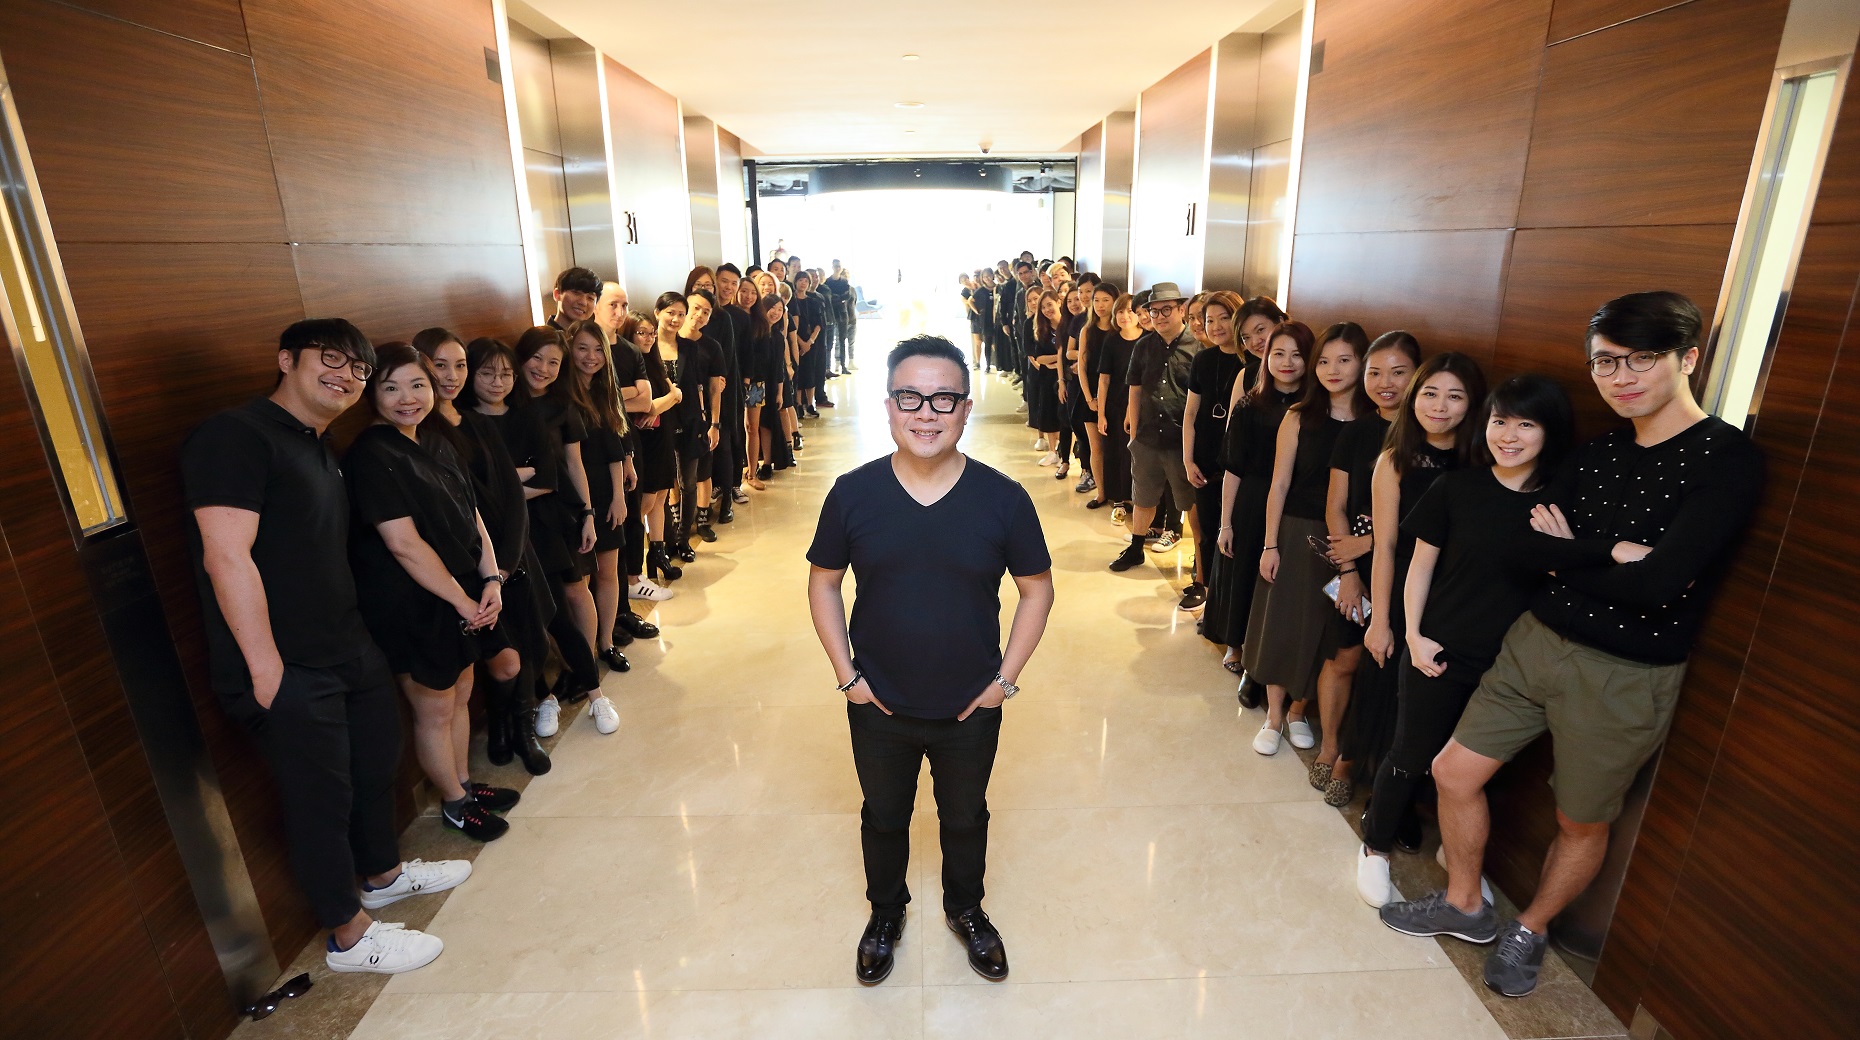 Spencer led his team to win the first Grand Prix for Nike at Cannes, a first for the whole Greater China region.